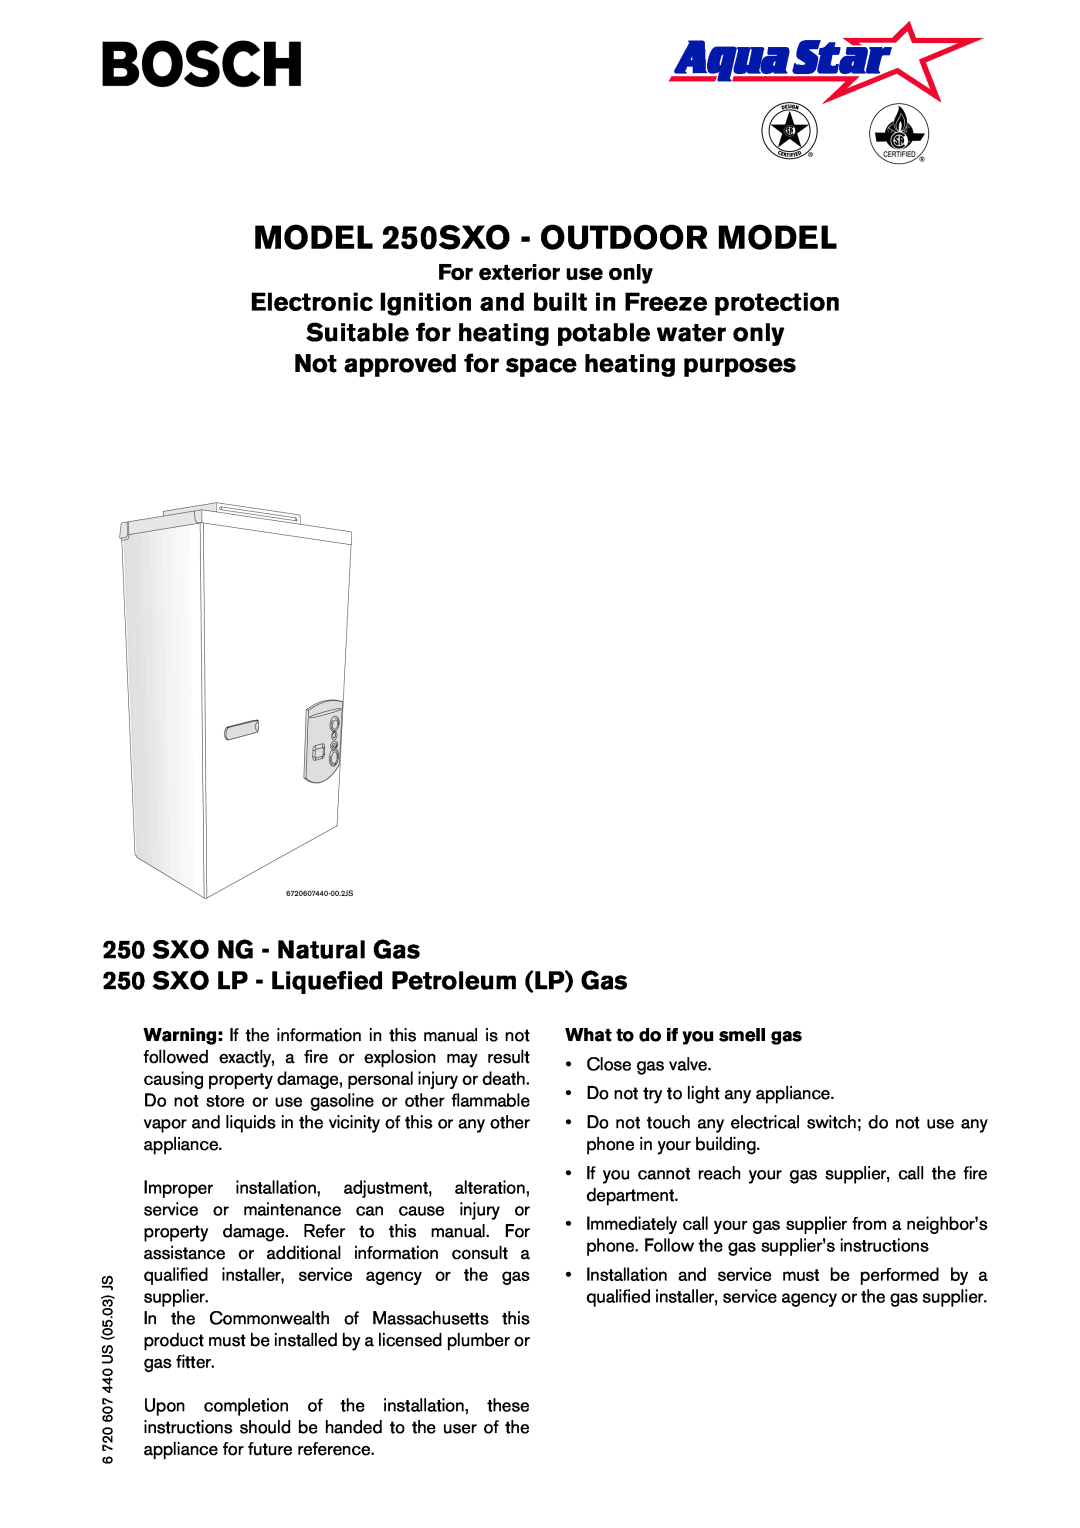 Bosch Appliances 250 SXO LP, 250 SXO NG manual Electronic Ignition and built in Freeze protection, For exterior use only 